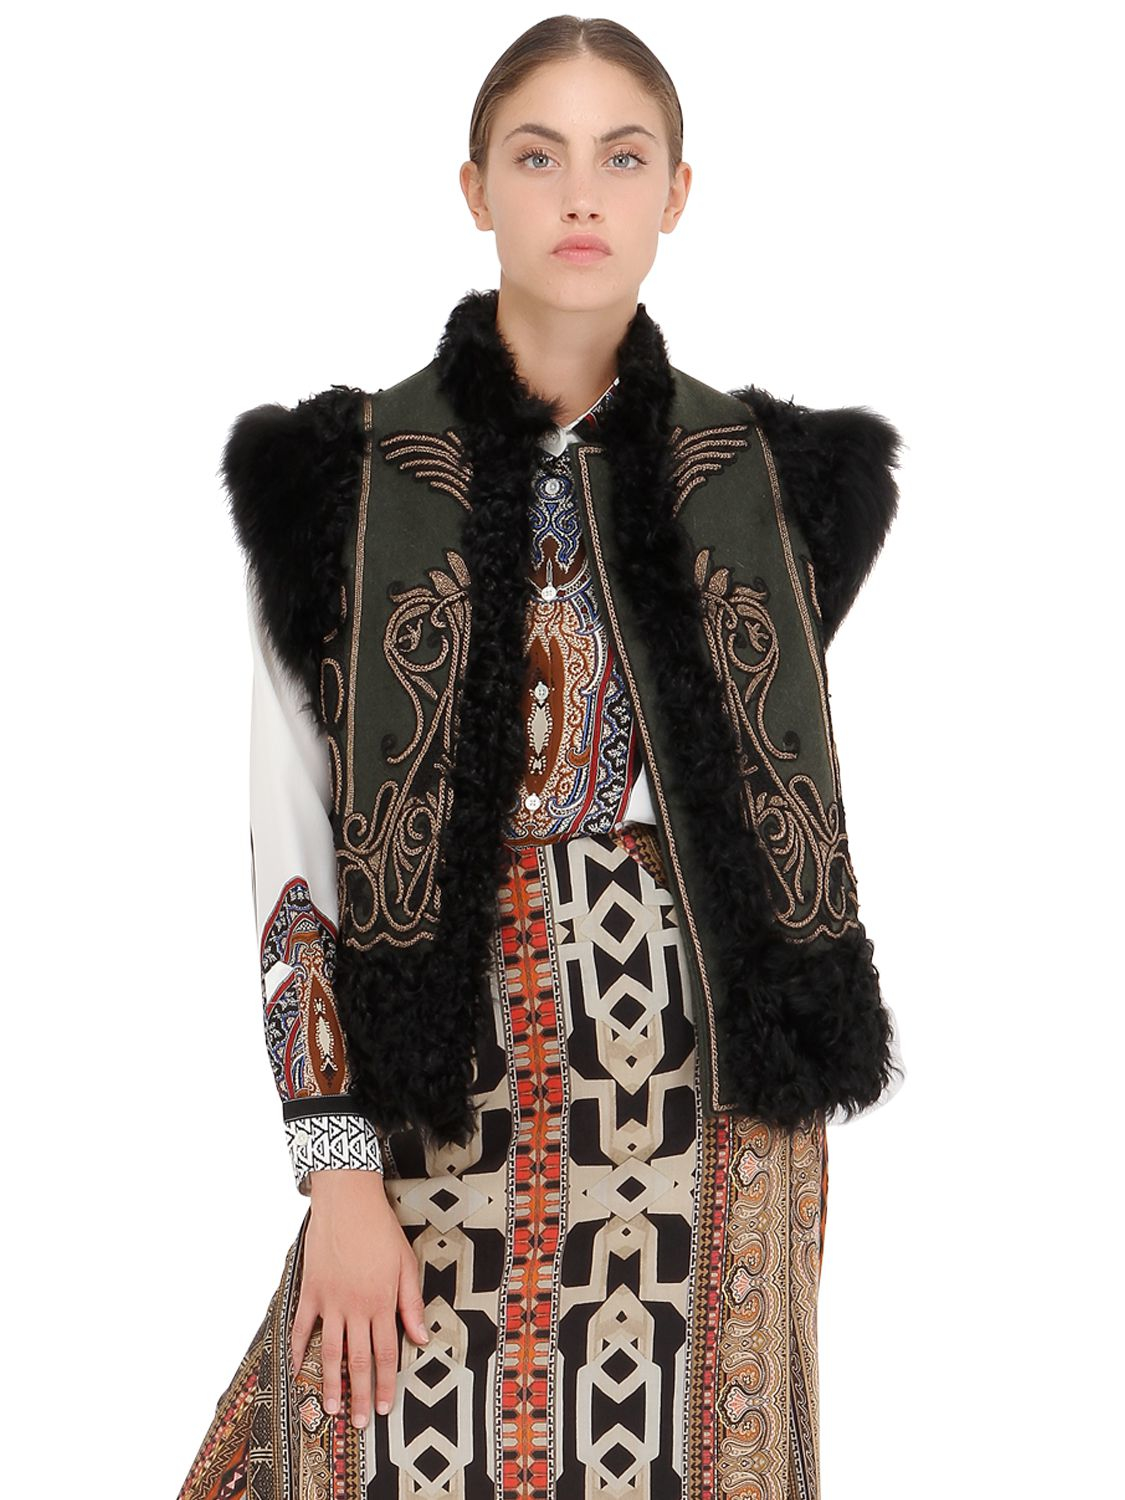 Etro Embroidered Shearling & Wool Vest in Black/Gold (Metallic) - Lyst